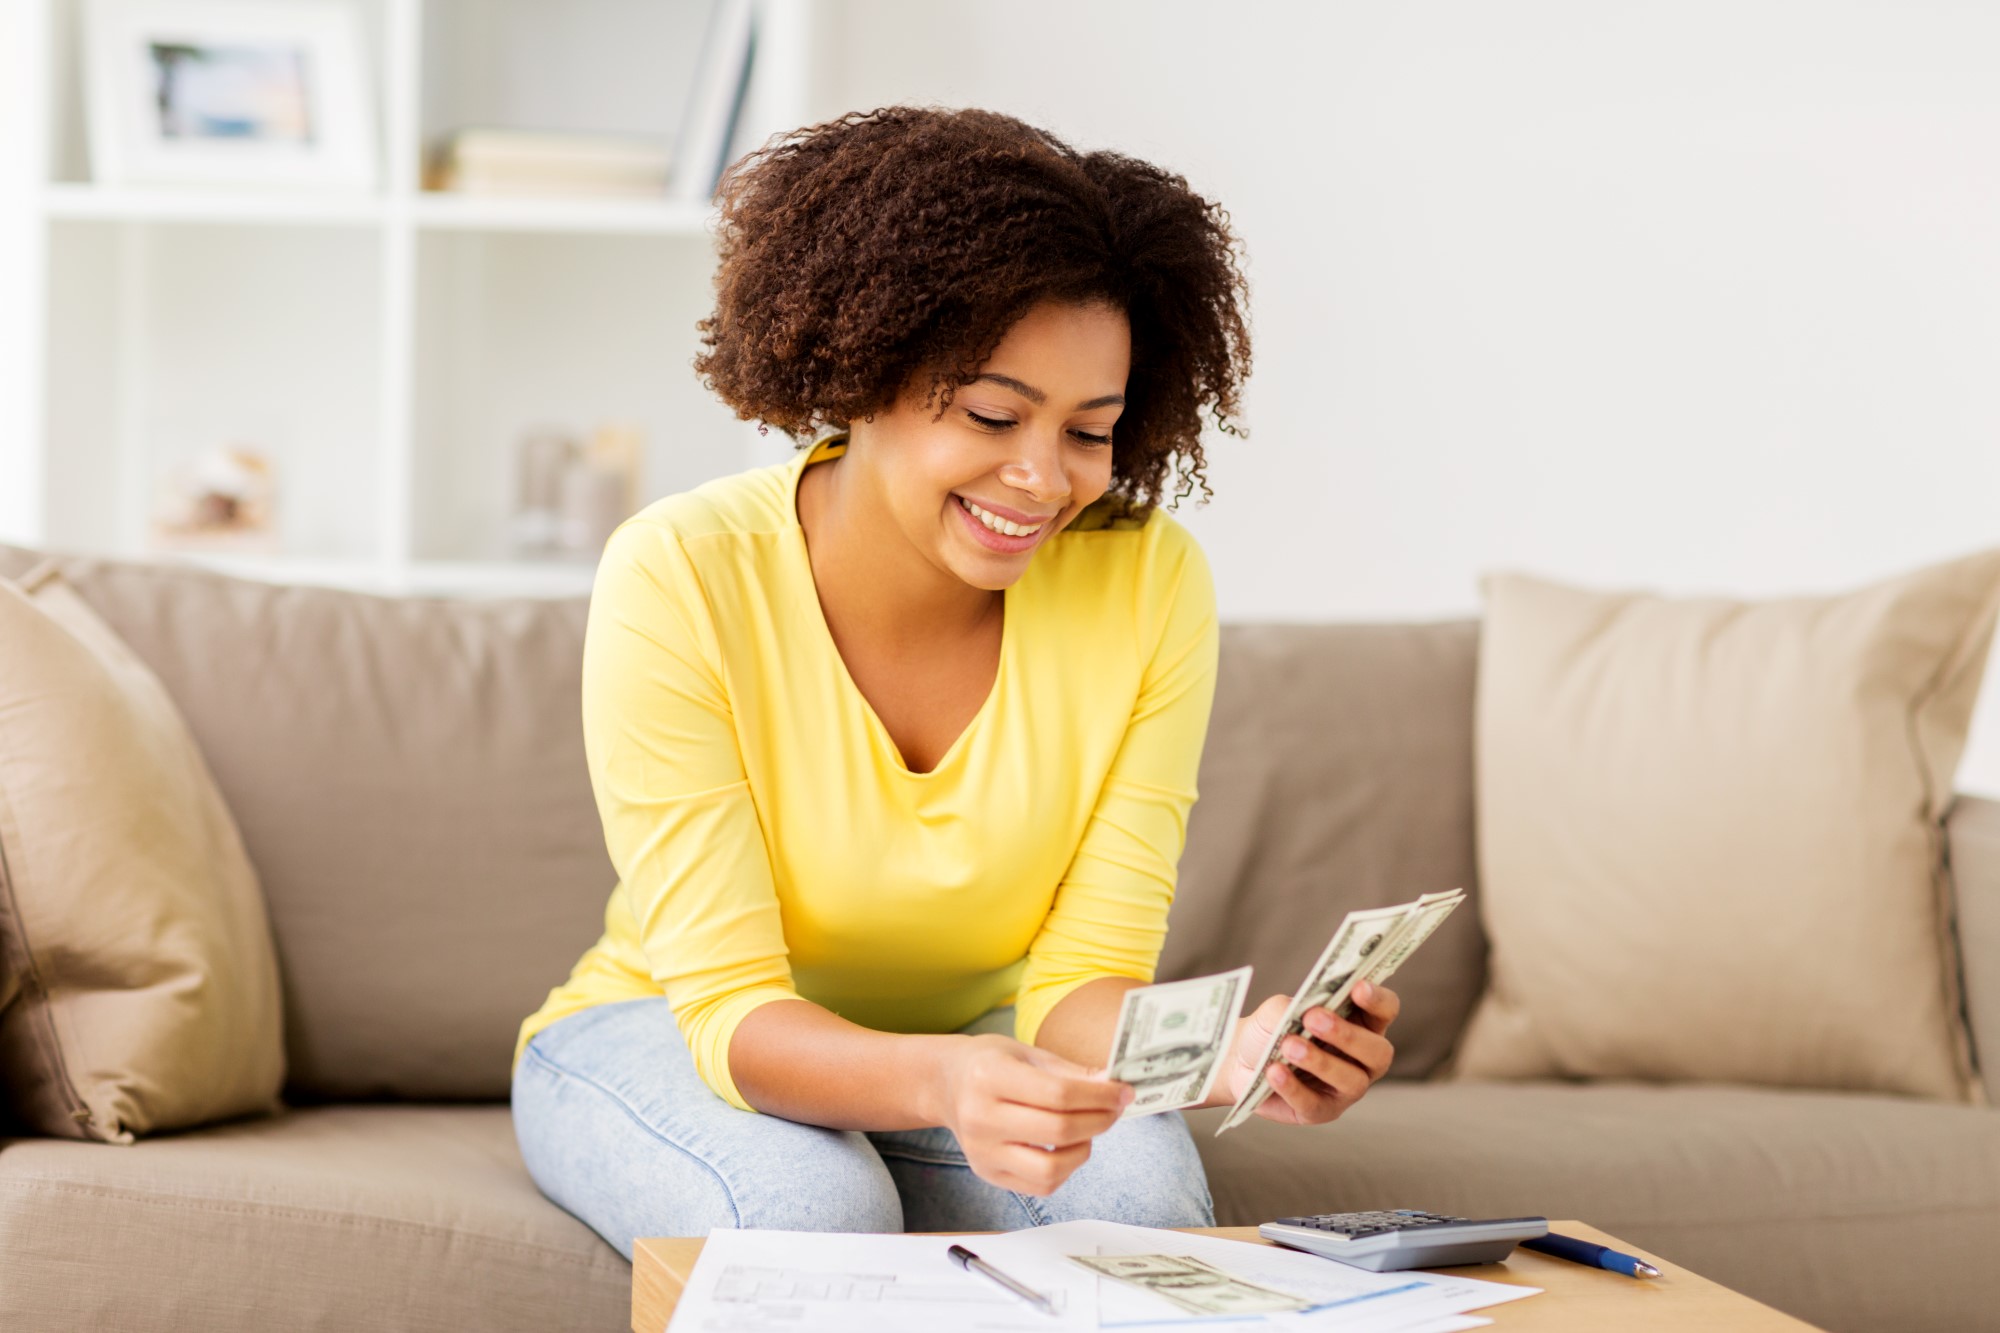 Financial wellness challenges; A young Black lady sitting on a couch, smiling and holding money